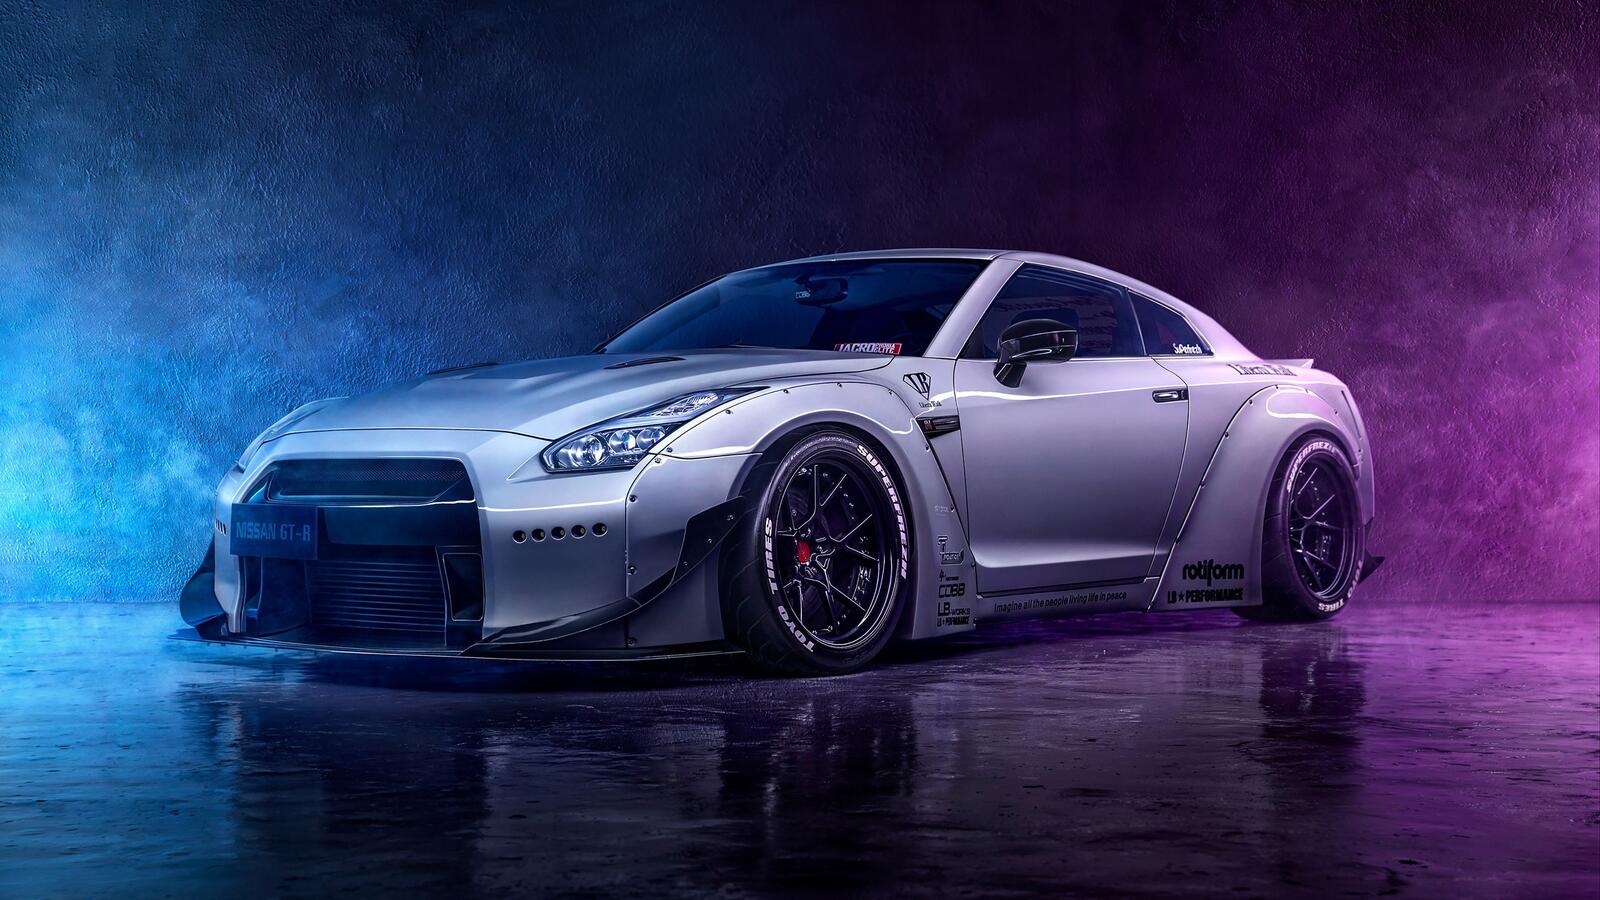 Free photo A white Nissan gtr in a smoky room